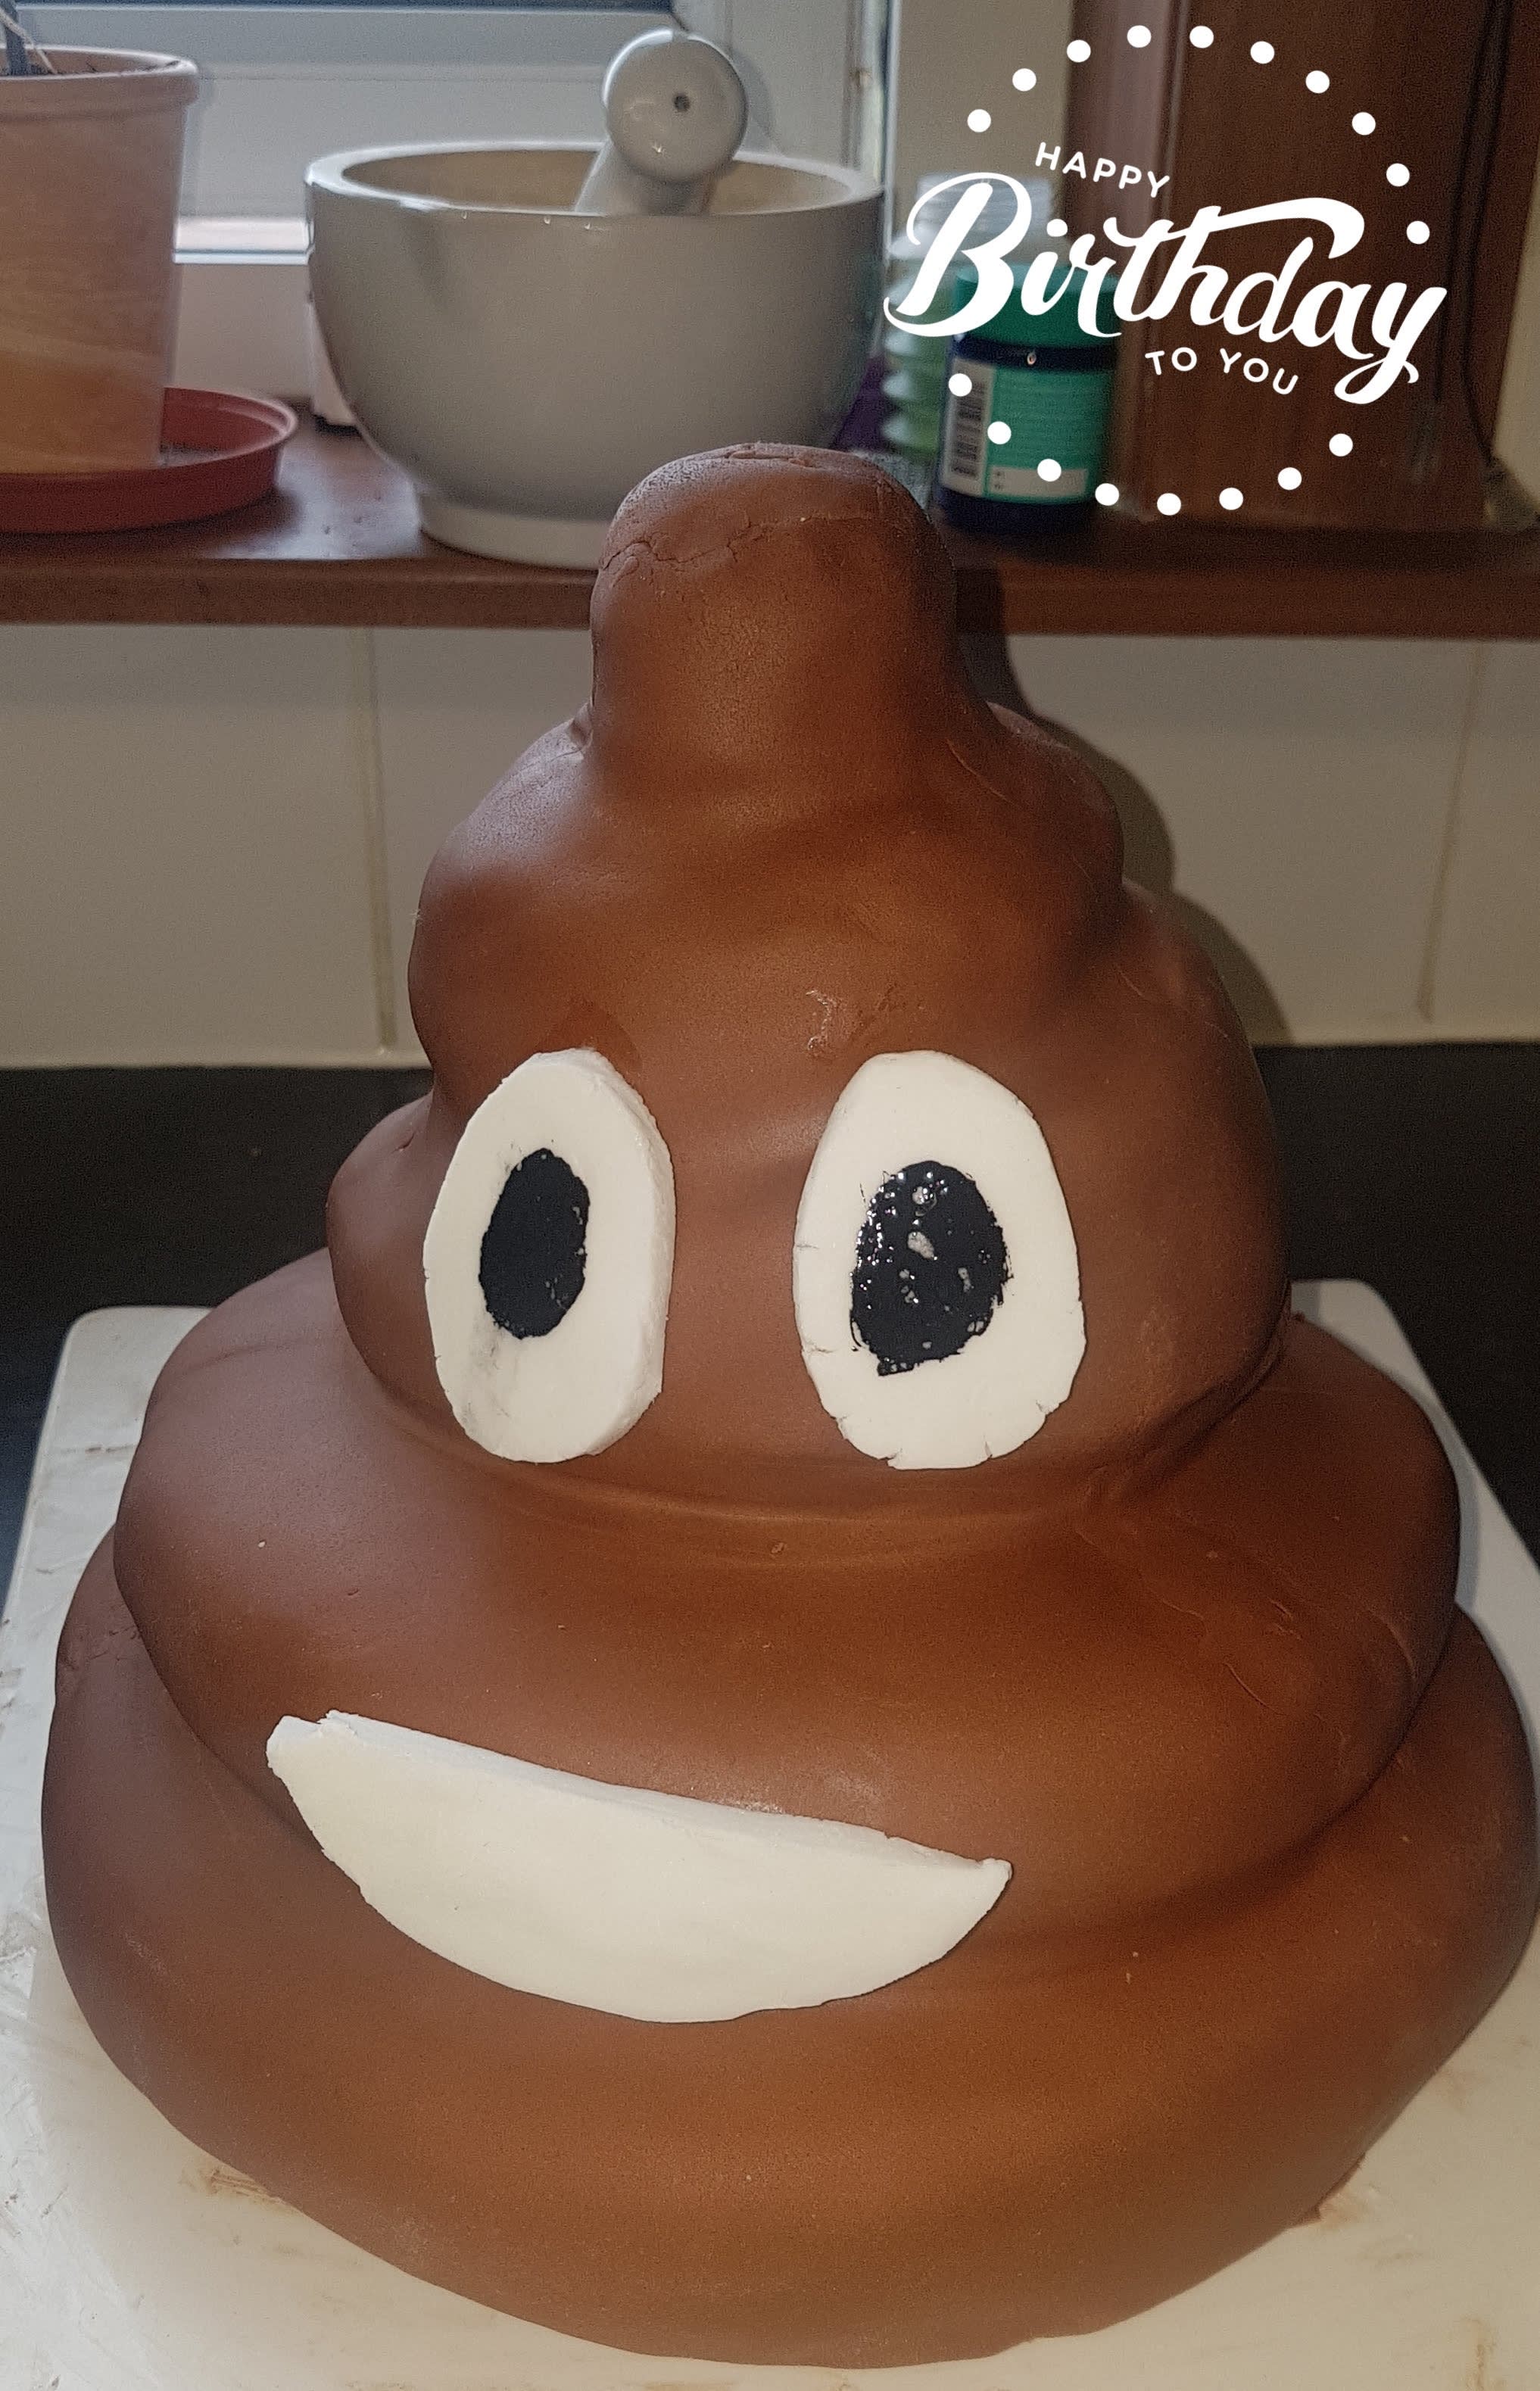 One of the funniest cakes that we have made in which a man in sitting on  pot and using mobile all the time. Now we all know someone with such  habits, donÕt